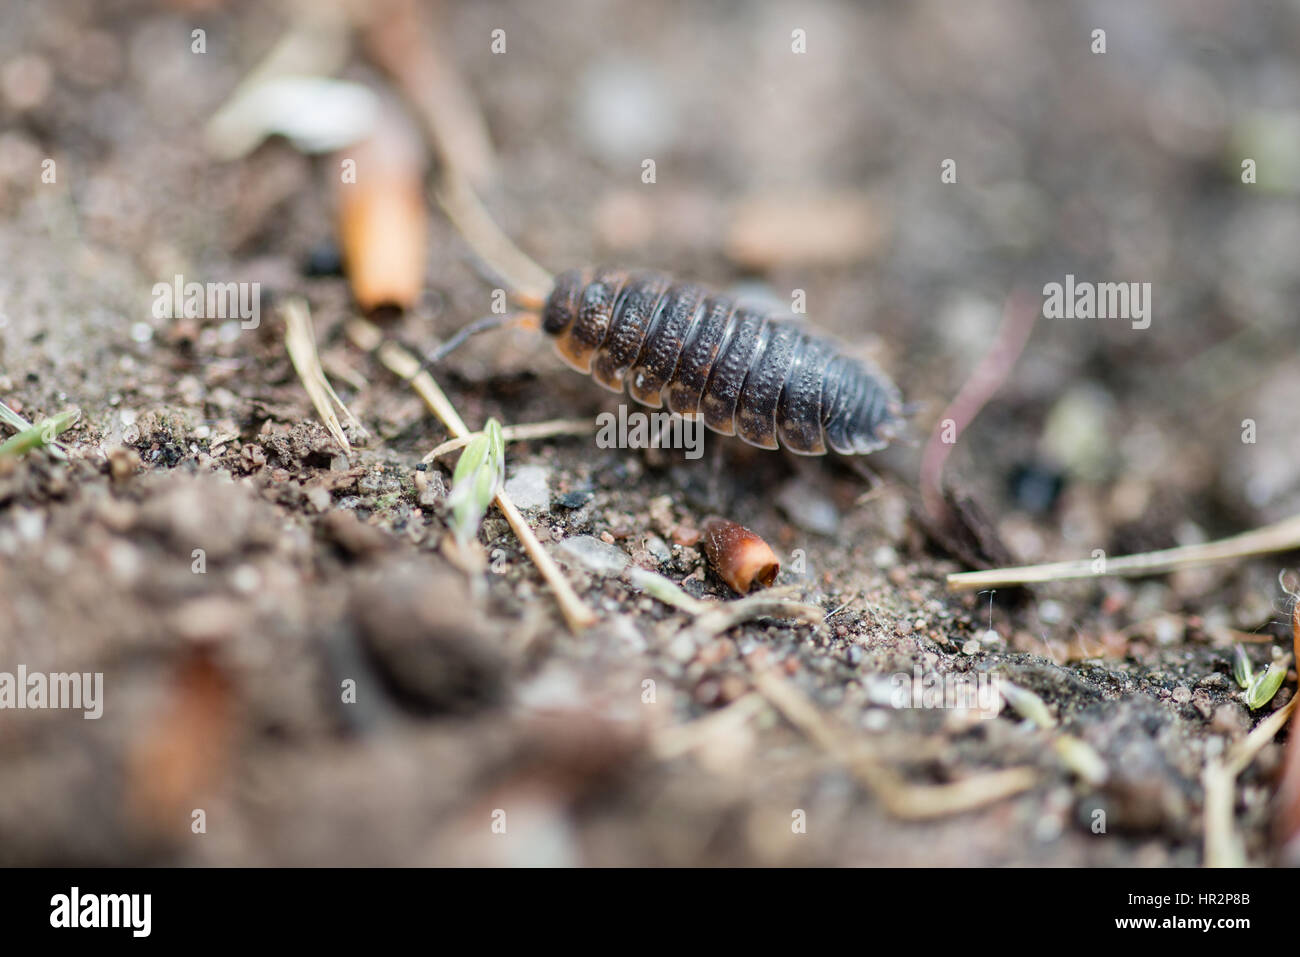 Close up of a woodlouse in a garden in the UK Stock Photo